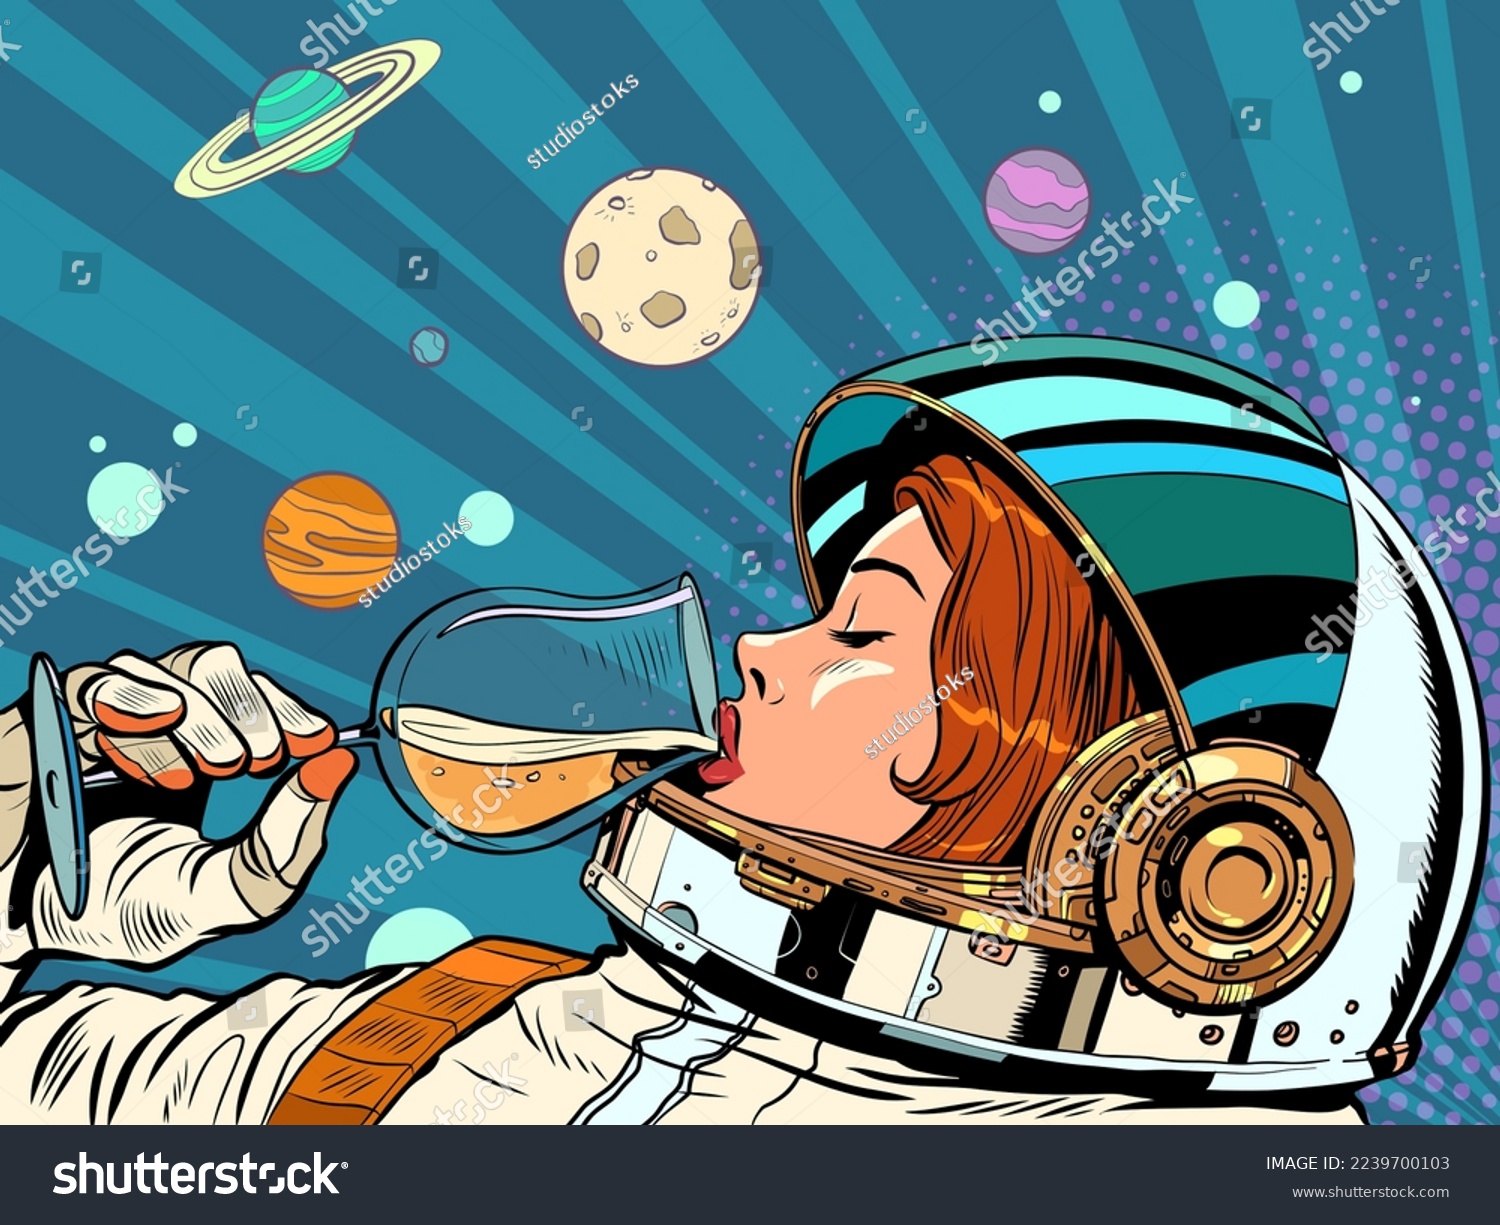 SVG of Astronaut woman drinks a glass of wine. Alcoholic party, new year holiday. Pop art retro vector illustration 50s 60s vintage kitsch style svg